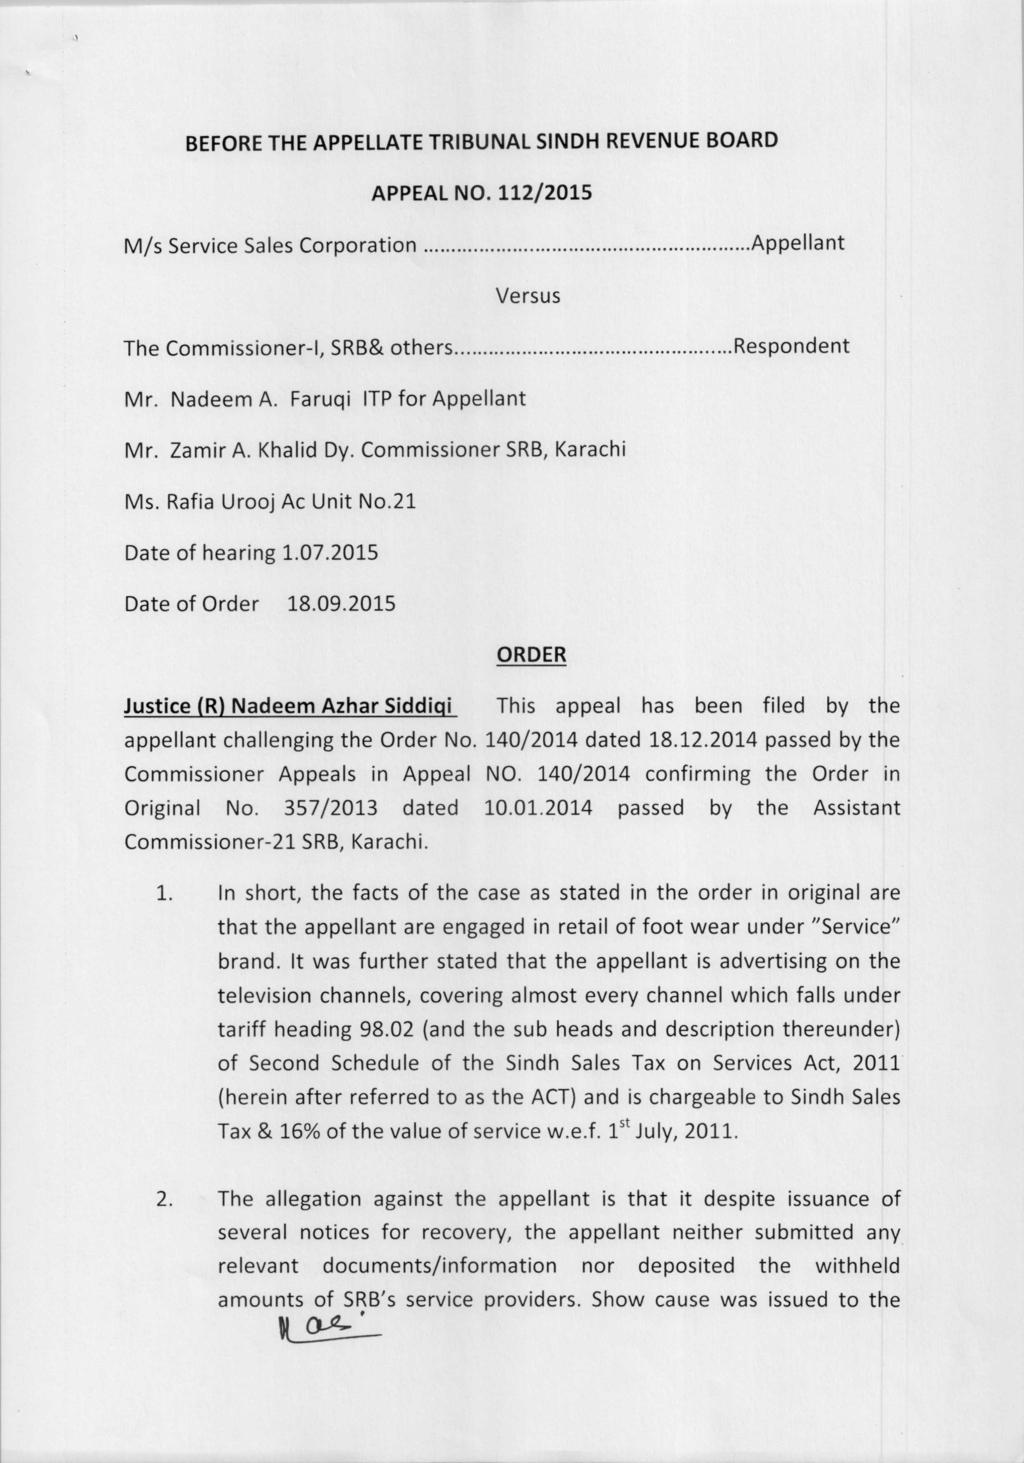 BEFORE THE APPELLATE TRIBUNAL SINDH REVENUE BOARD APPEAL NO. 112/2015 M/s Service Sales Corporation Appellant Versus The Commissioner-I, SRB& others Respondent Mr. Nadeem A.